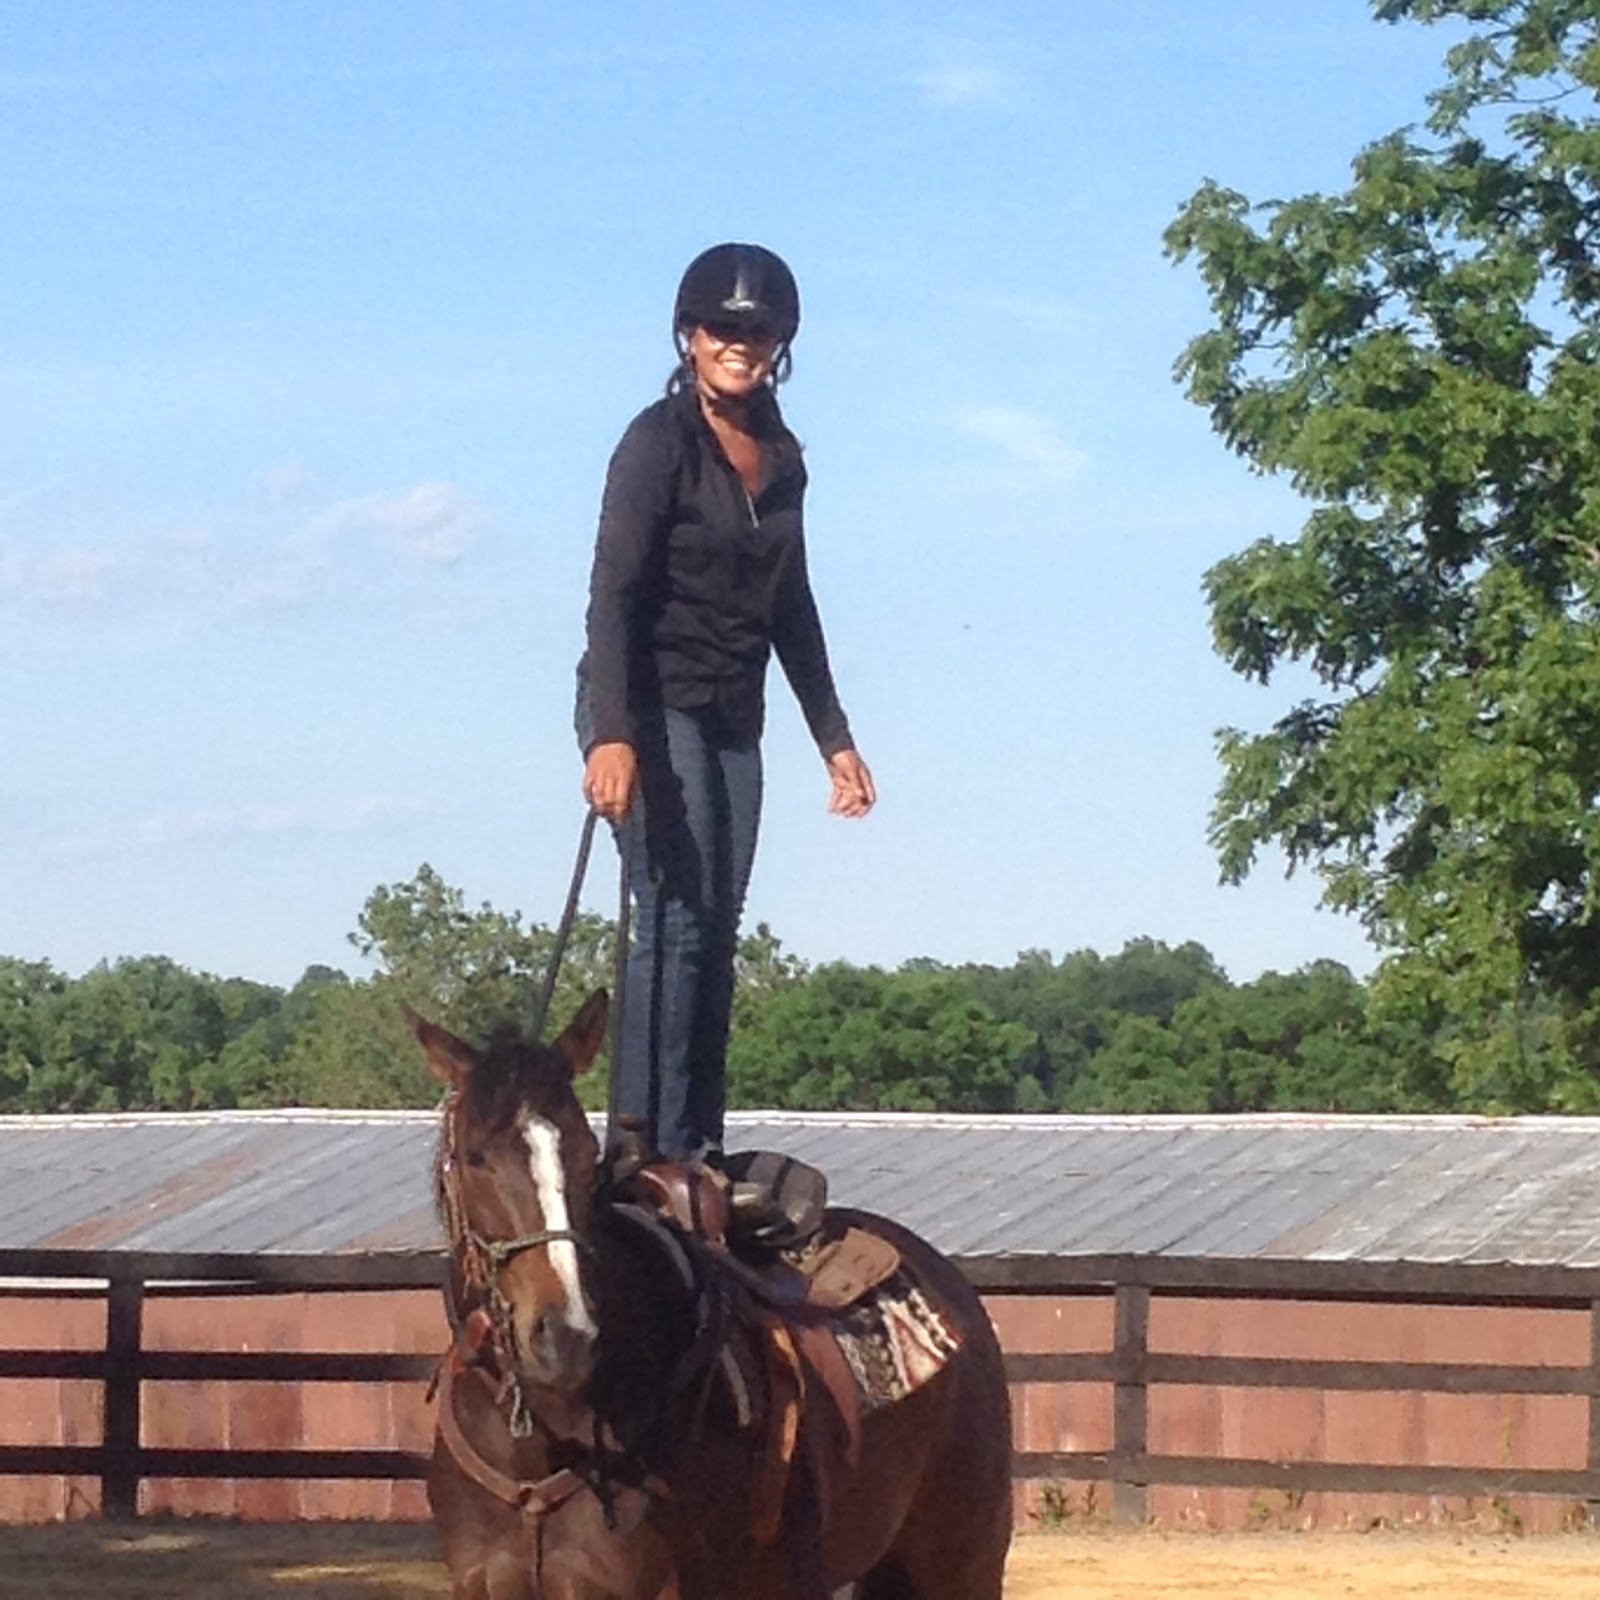 Ms. Jean and her 4 yr old filly, Anna, will be performing at the Thoroughbred Challenge in Kentucky